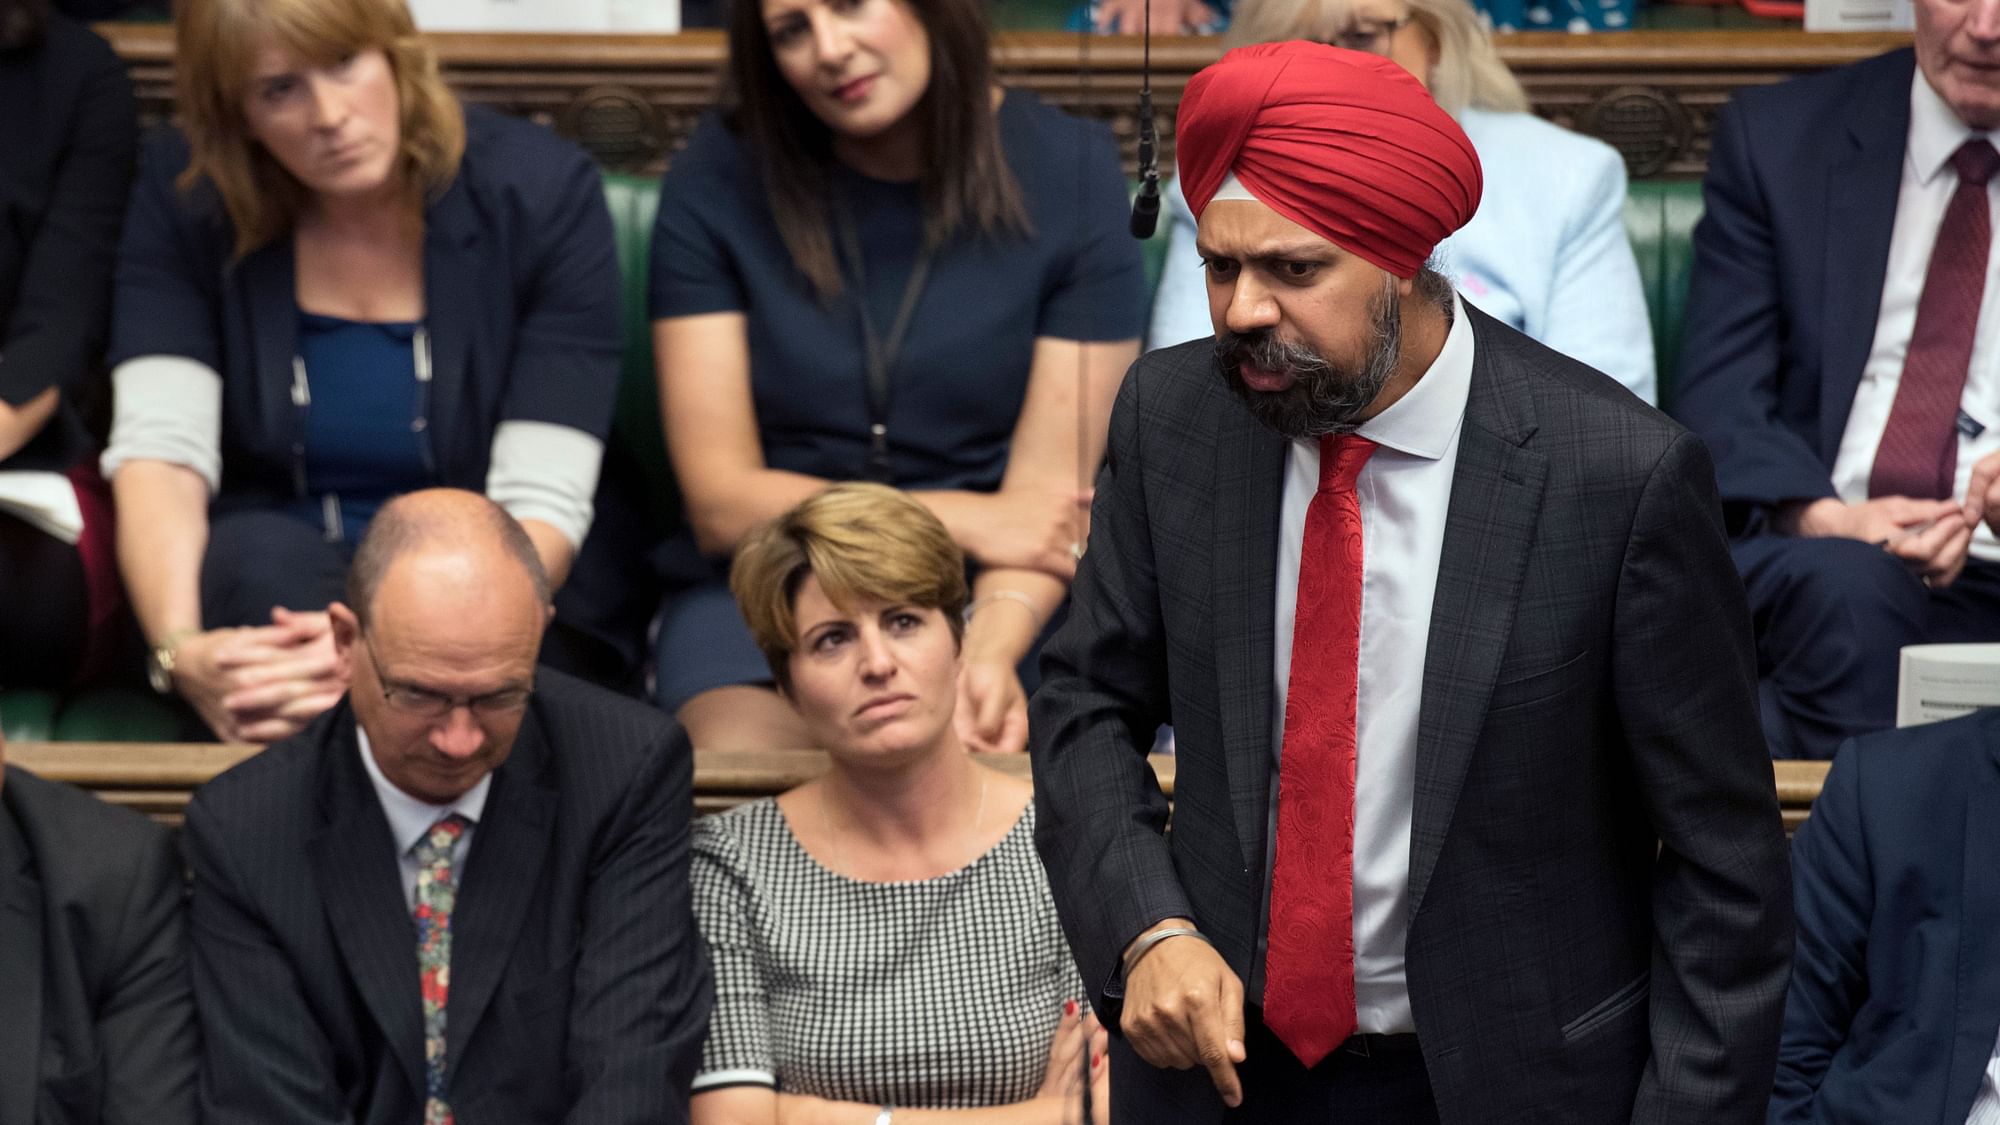 In this handout photo provided by the House of Commons, Labour MP Tanmanjeet Singh Dhesi, was applauded after challenging Prime Minister Boris Johnson to apologize for comparing Muslim women who wear face-covering veils to “letter boxes.”